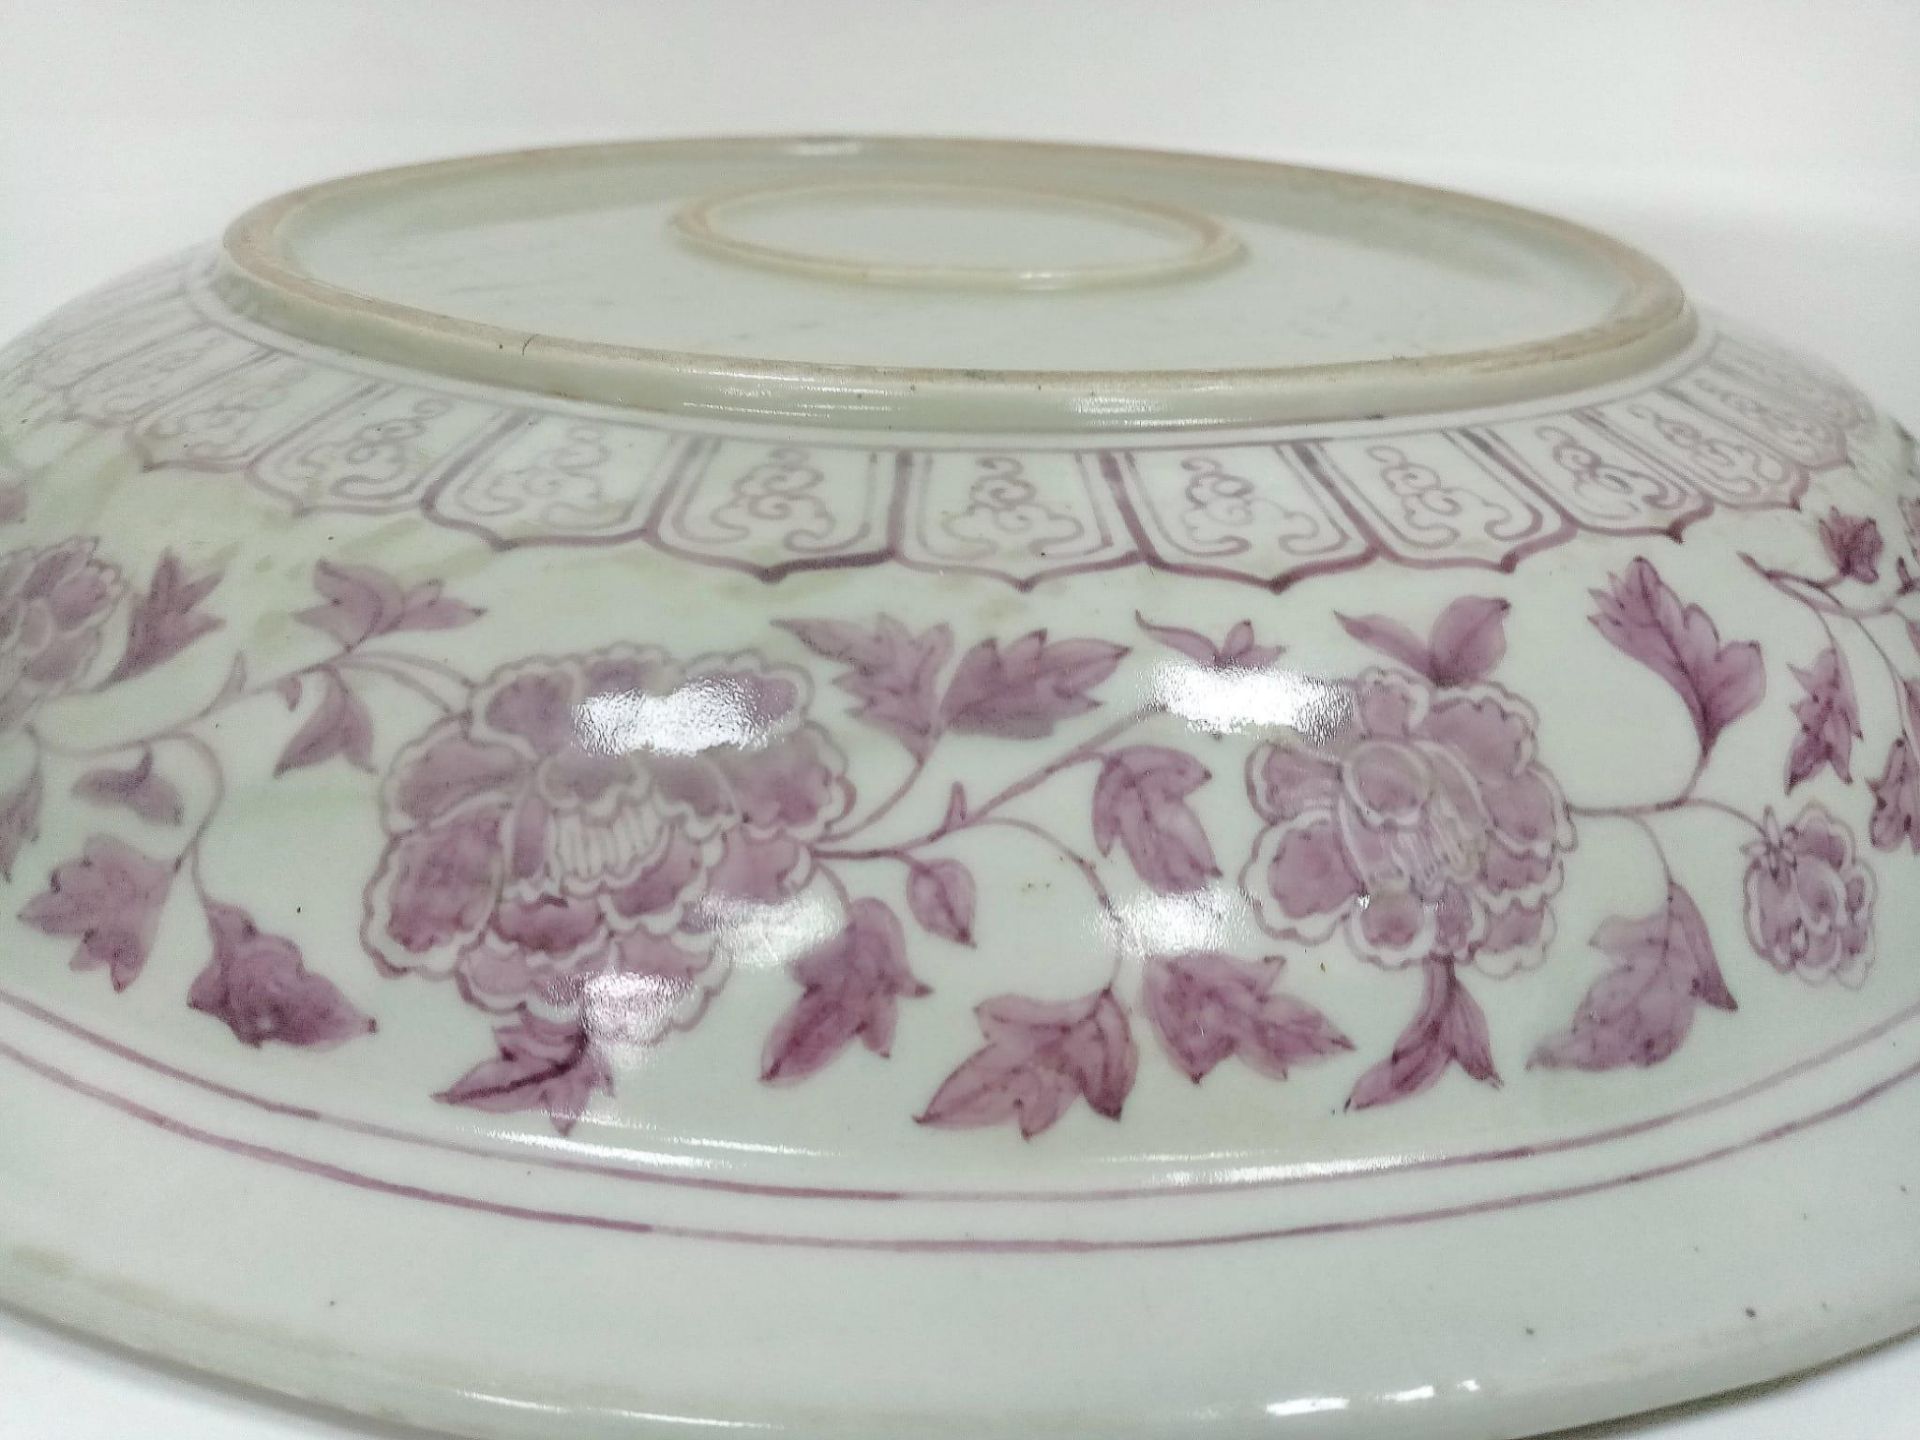 Large Antique Burgundy Floral Serving Dish. Whilst no markings exist on this large bowl, the hand- - Image 6 of 6